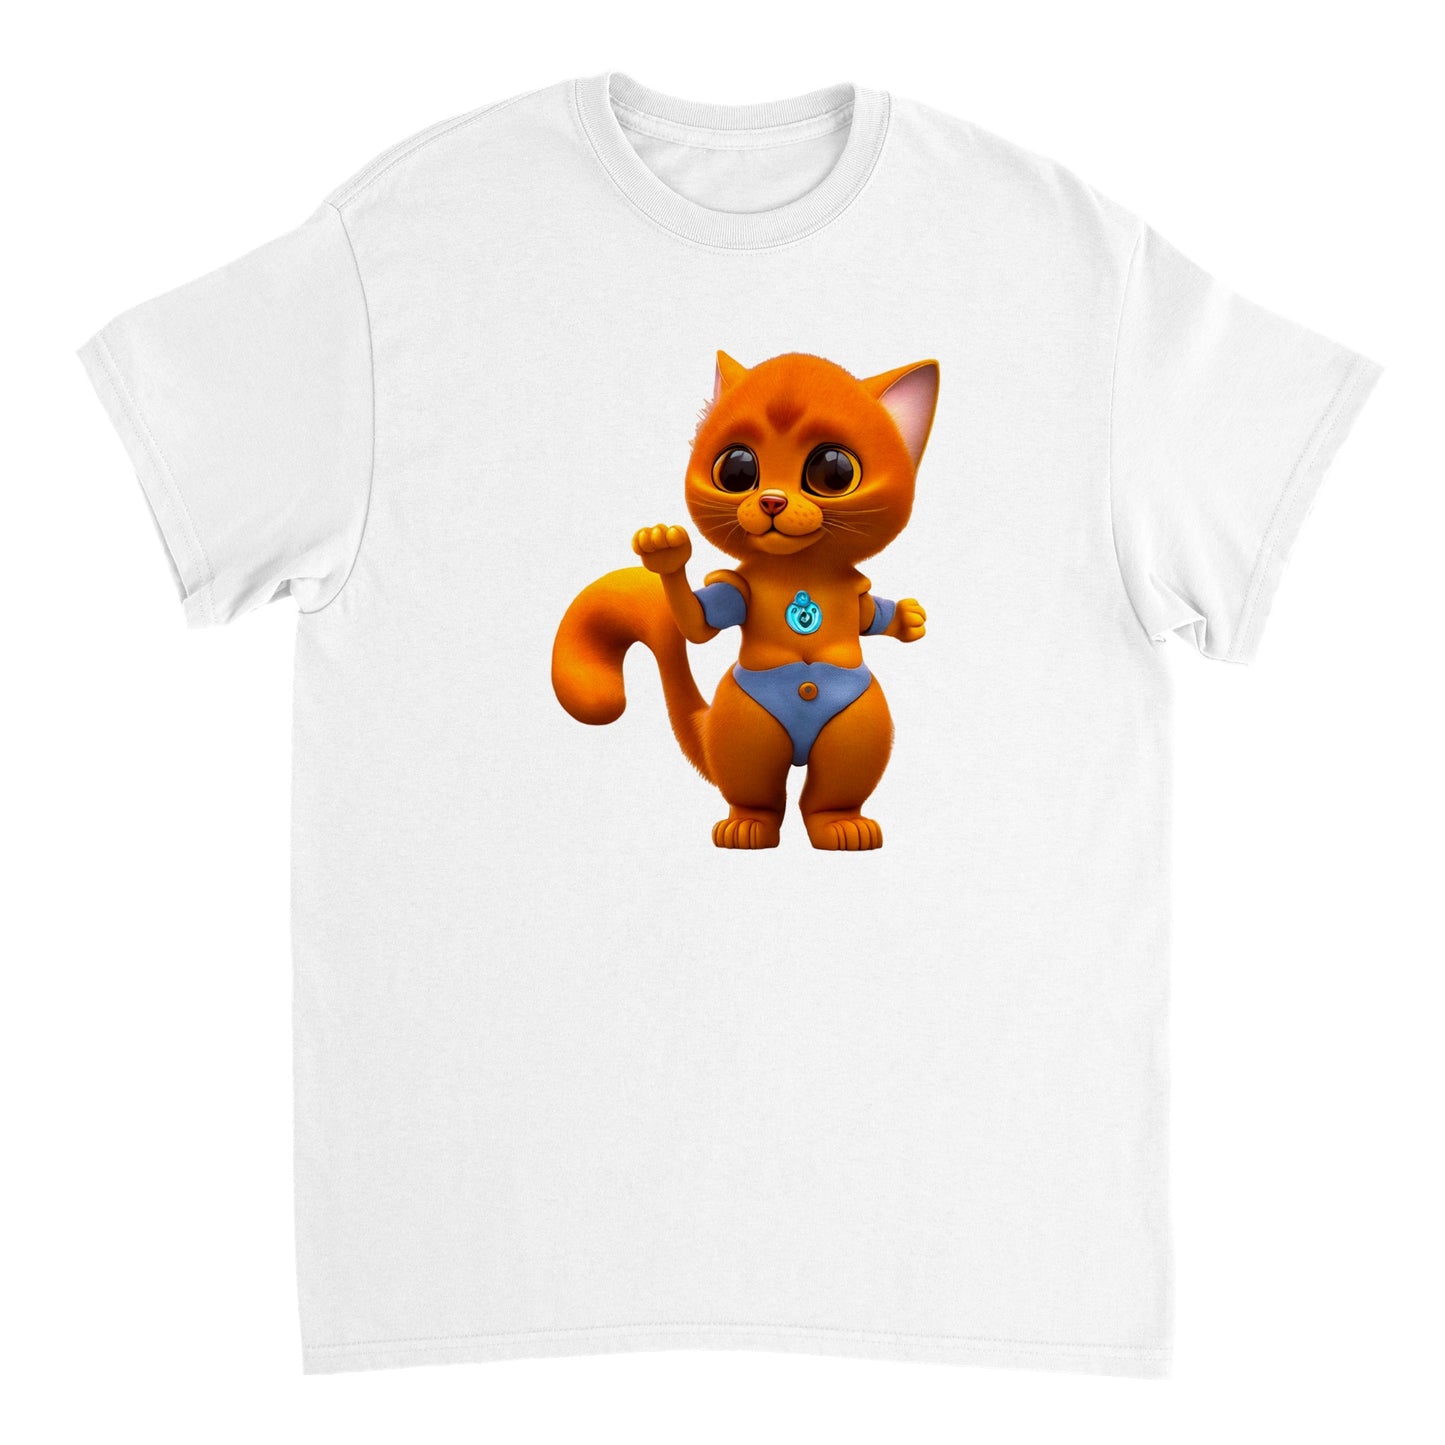 Adorable, Cool, Cute Cats and Kittens Toy - Heavyweight Unisex Crewneck T-shirt 48